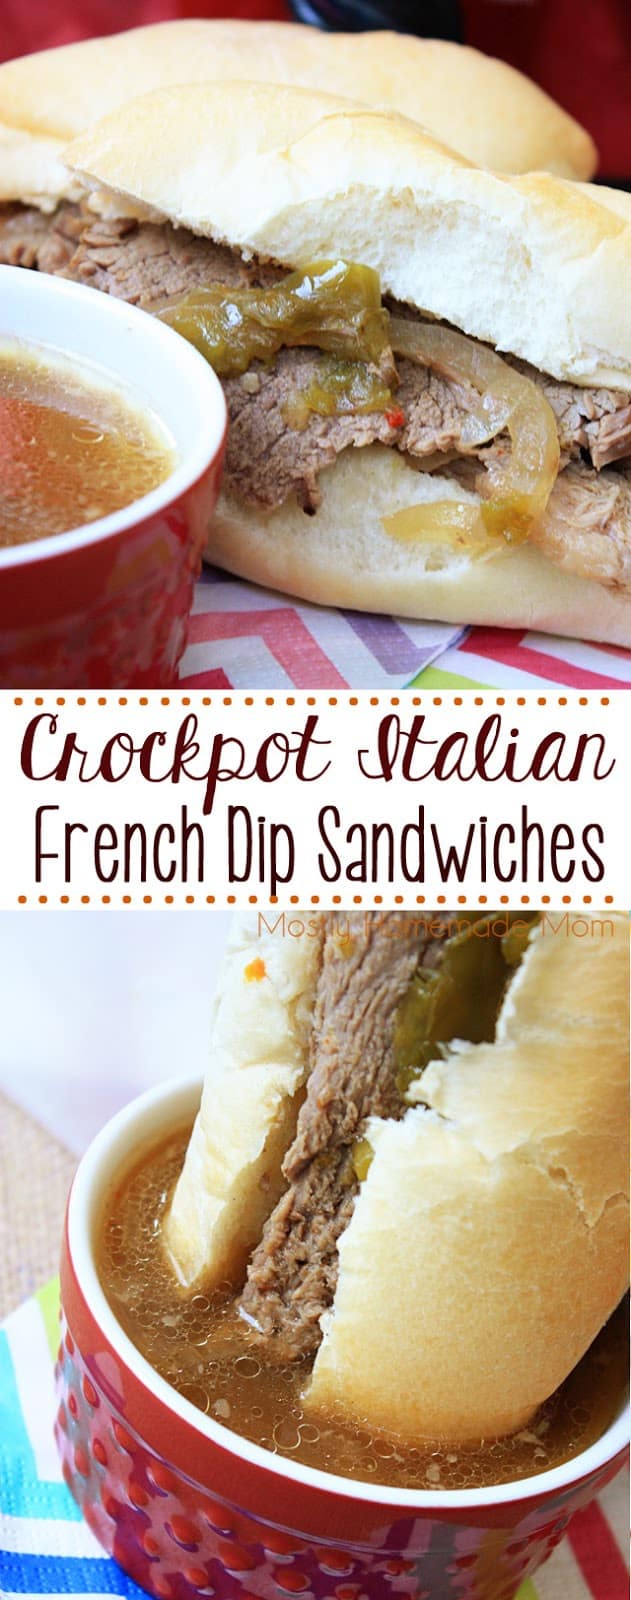 Crockpot Italian French Dip Sandwiches - Mostly Homemade Mom